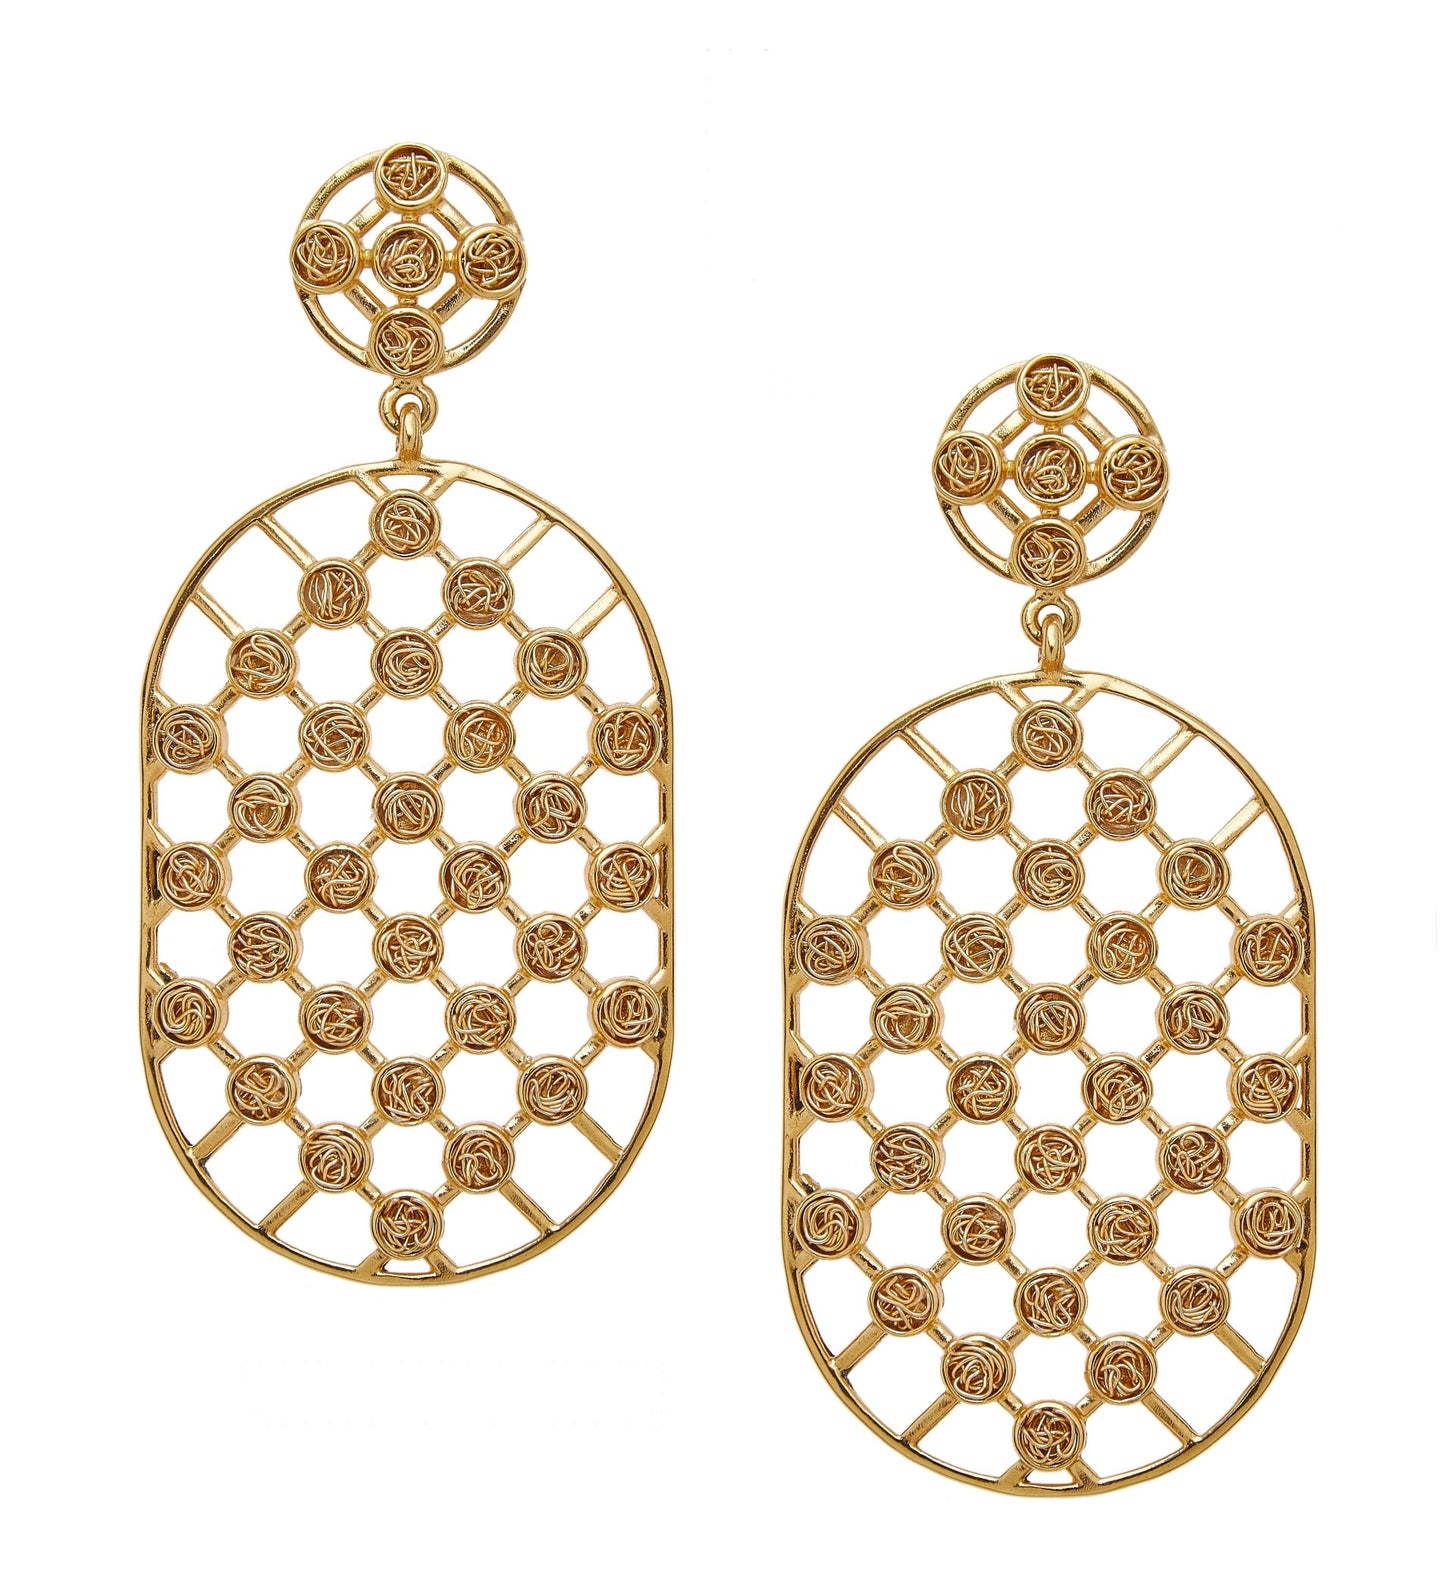 Artfully crafted gold drop earrings with a balance of simplicity and sophistication.